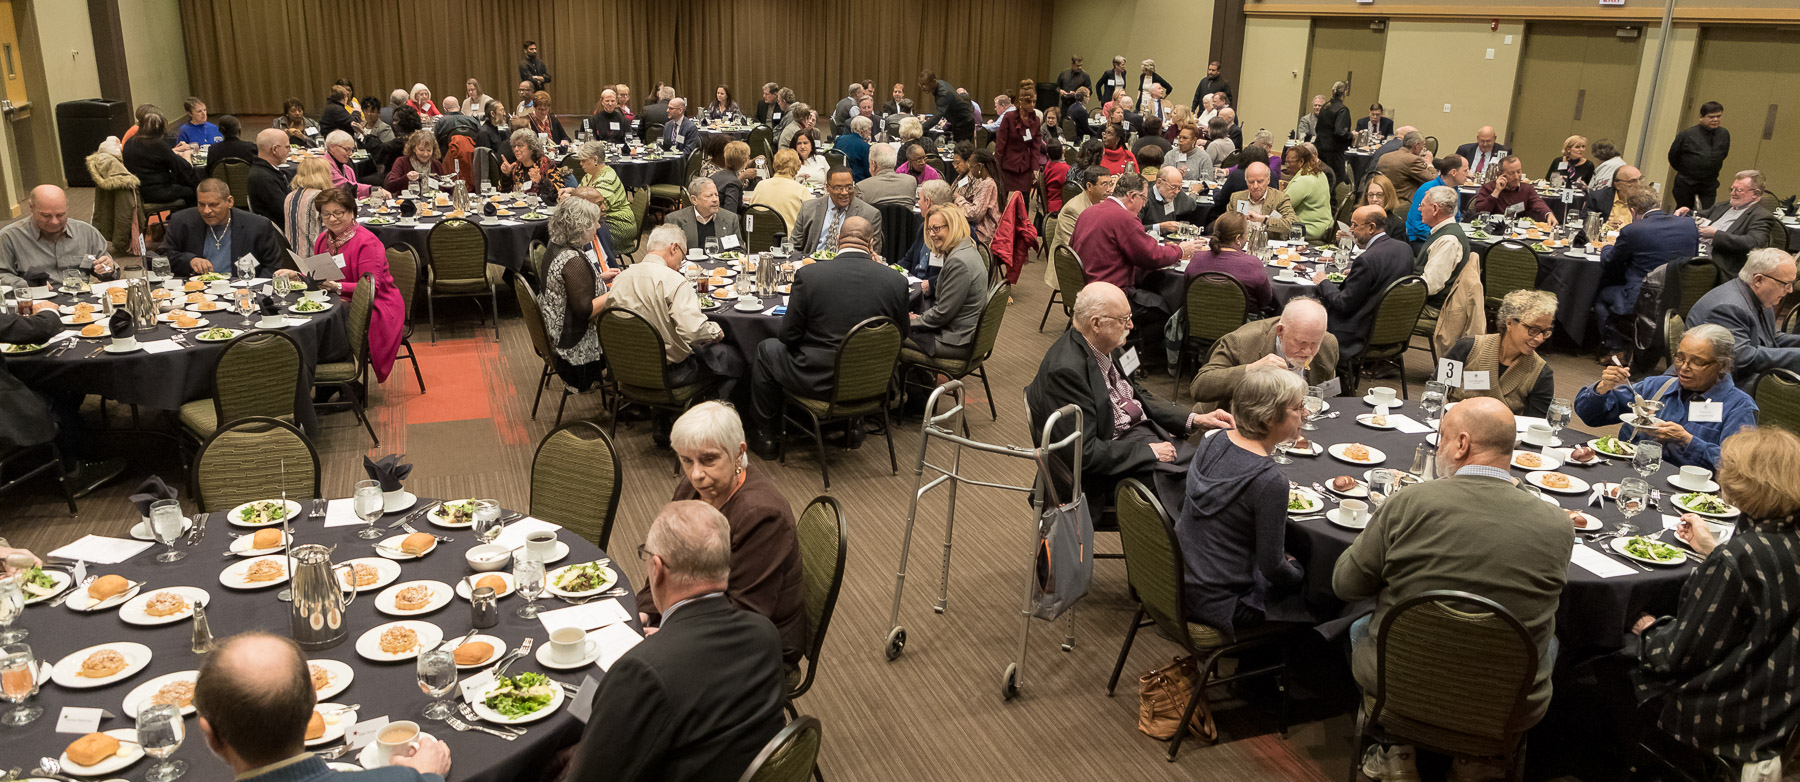 DePaul University faculty and staff members are honored for their 25 years of service during the annual luncheon, Tuesday, Nov. 13, 2018, at the Lincoln Park Student Center. The honorees were recognized by A. Gabriel Esteban, Ph.D., president of DePaul, and will have their names added to plaques located on the Loop and Lincoln Park Campuses. (DePaul University/Jeff Carrion)